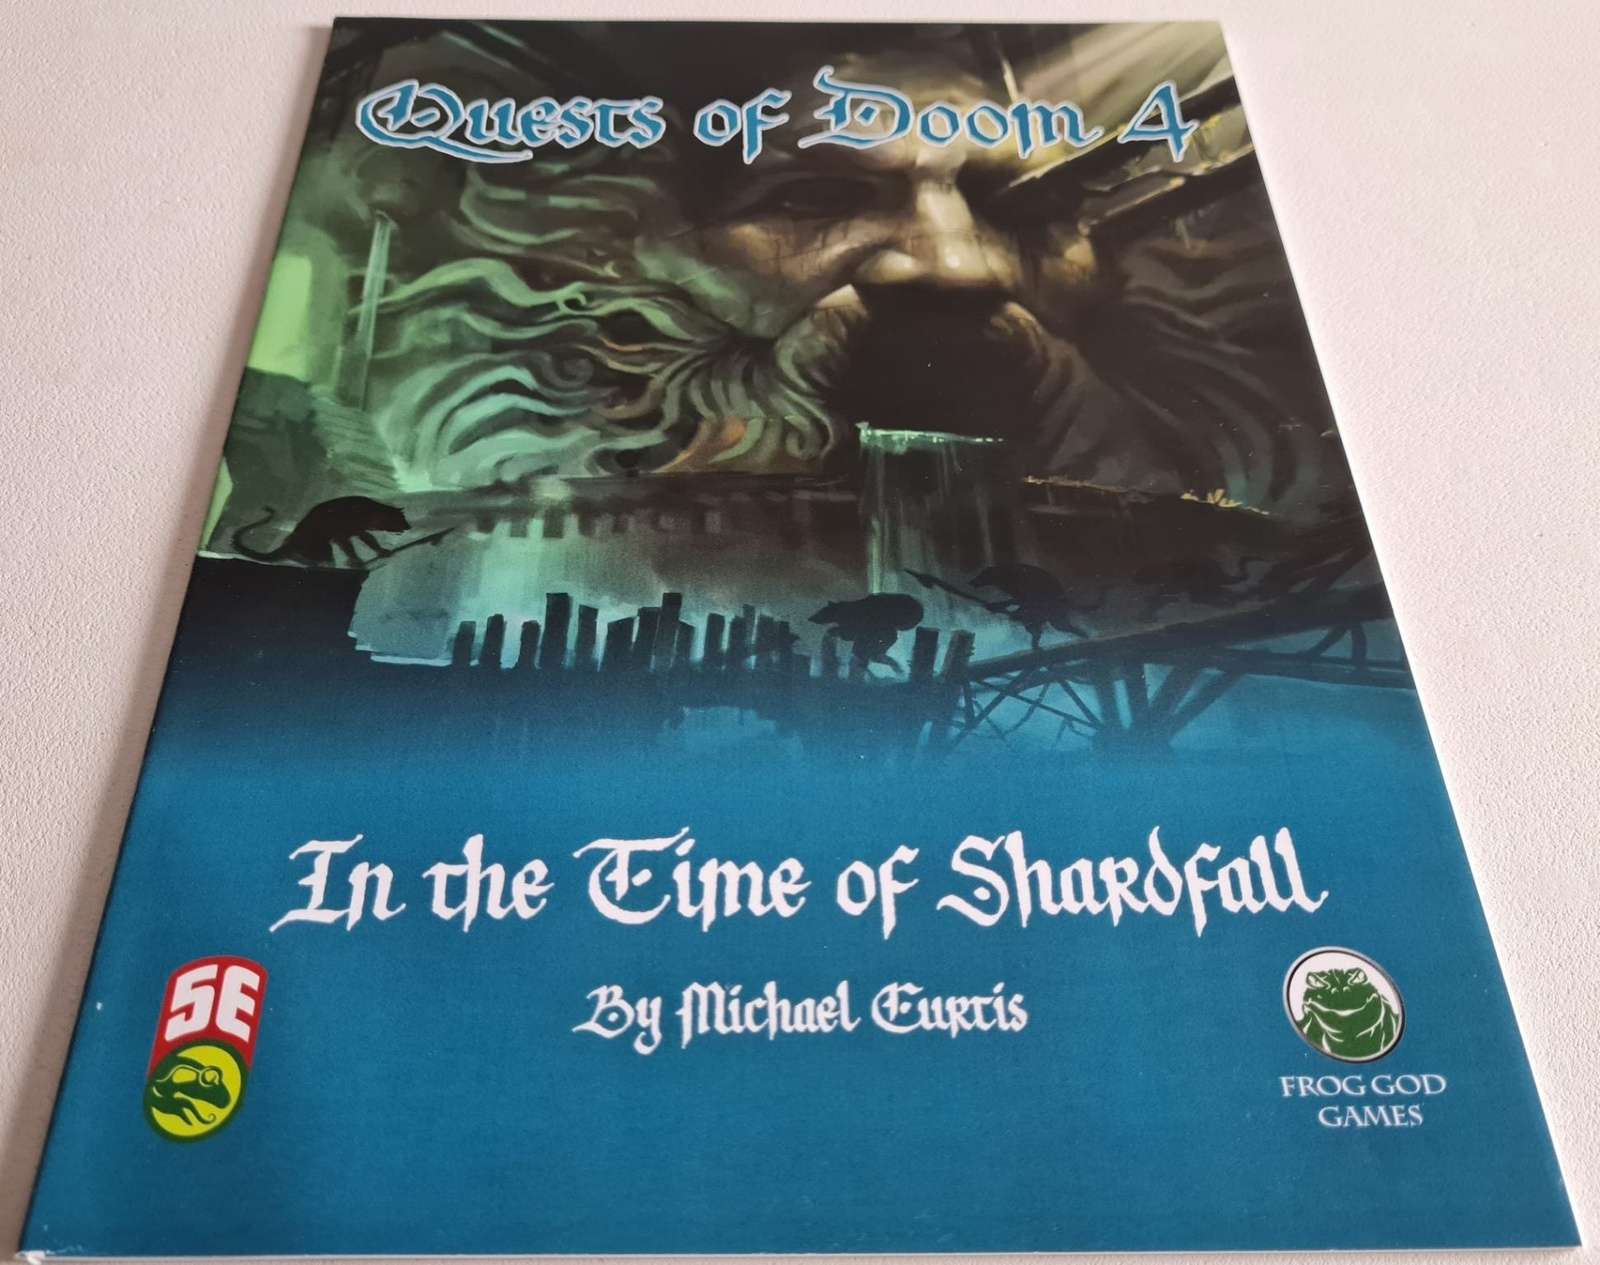 Quests of Doom 4: In the Time of Shardfall - D&D 5th Edition (5e)